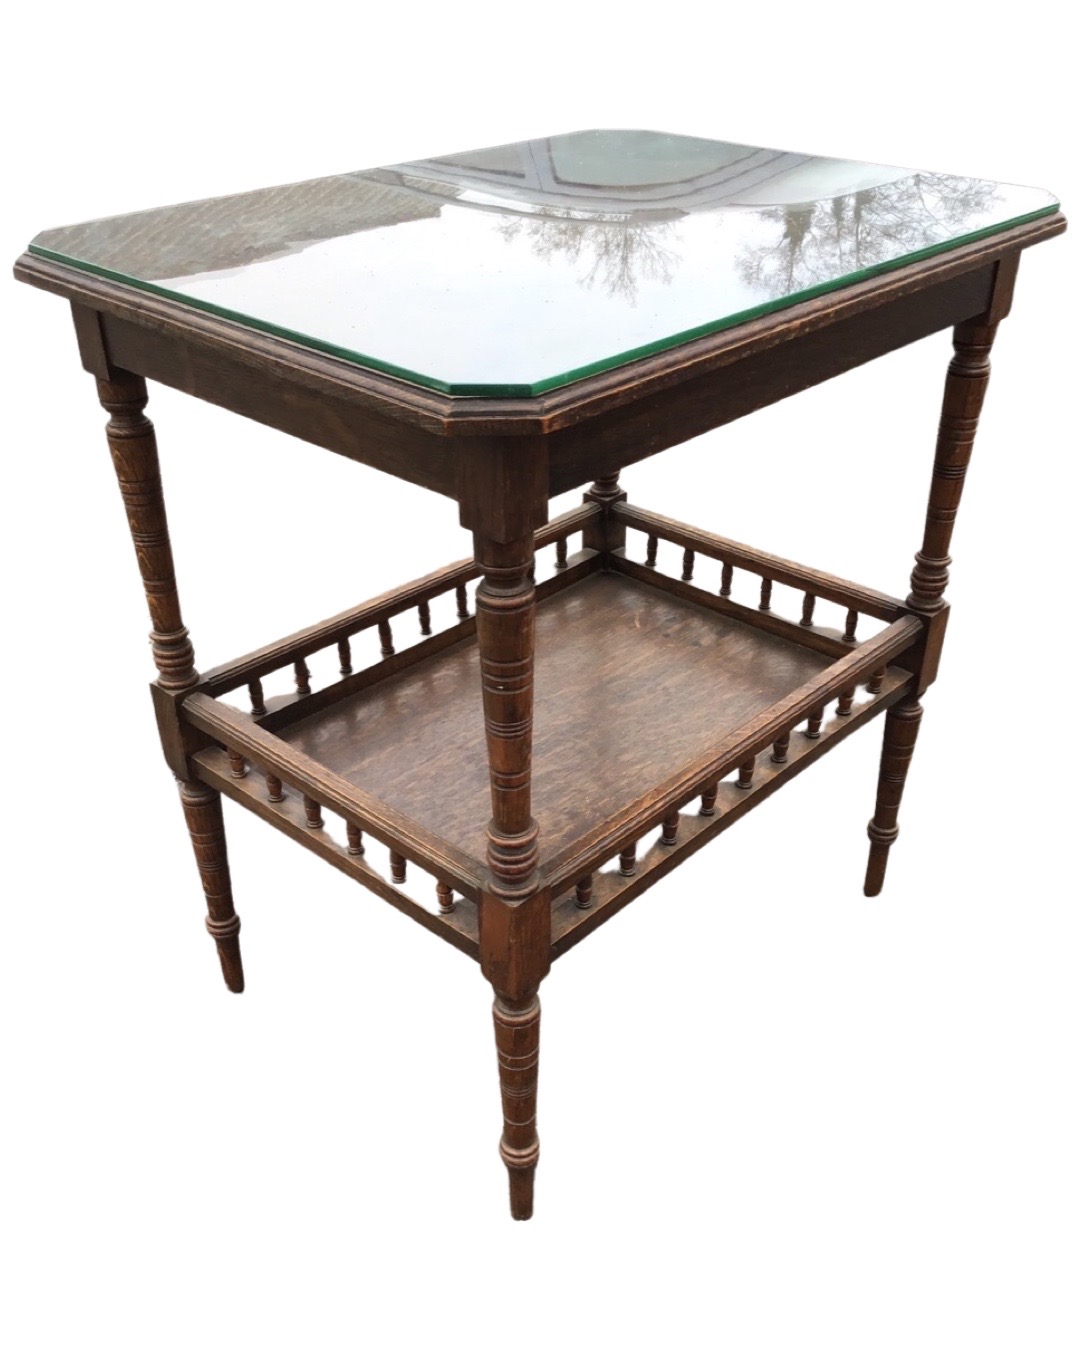 A late Victorian oak centre table, the canted moulded top with plate glass on ring-turned legs